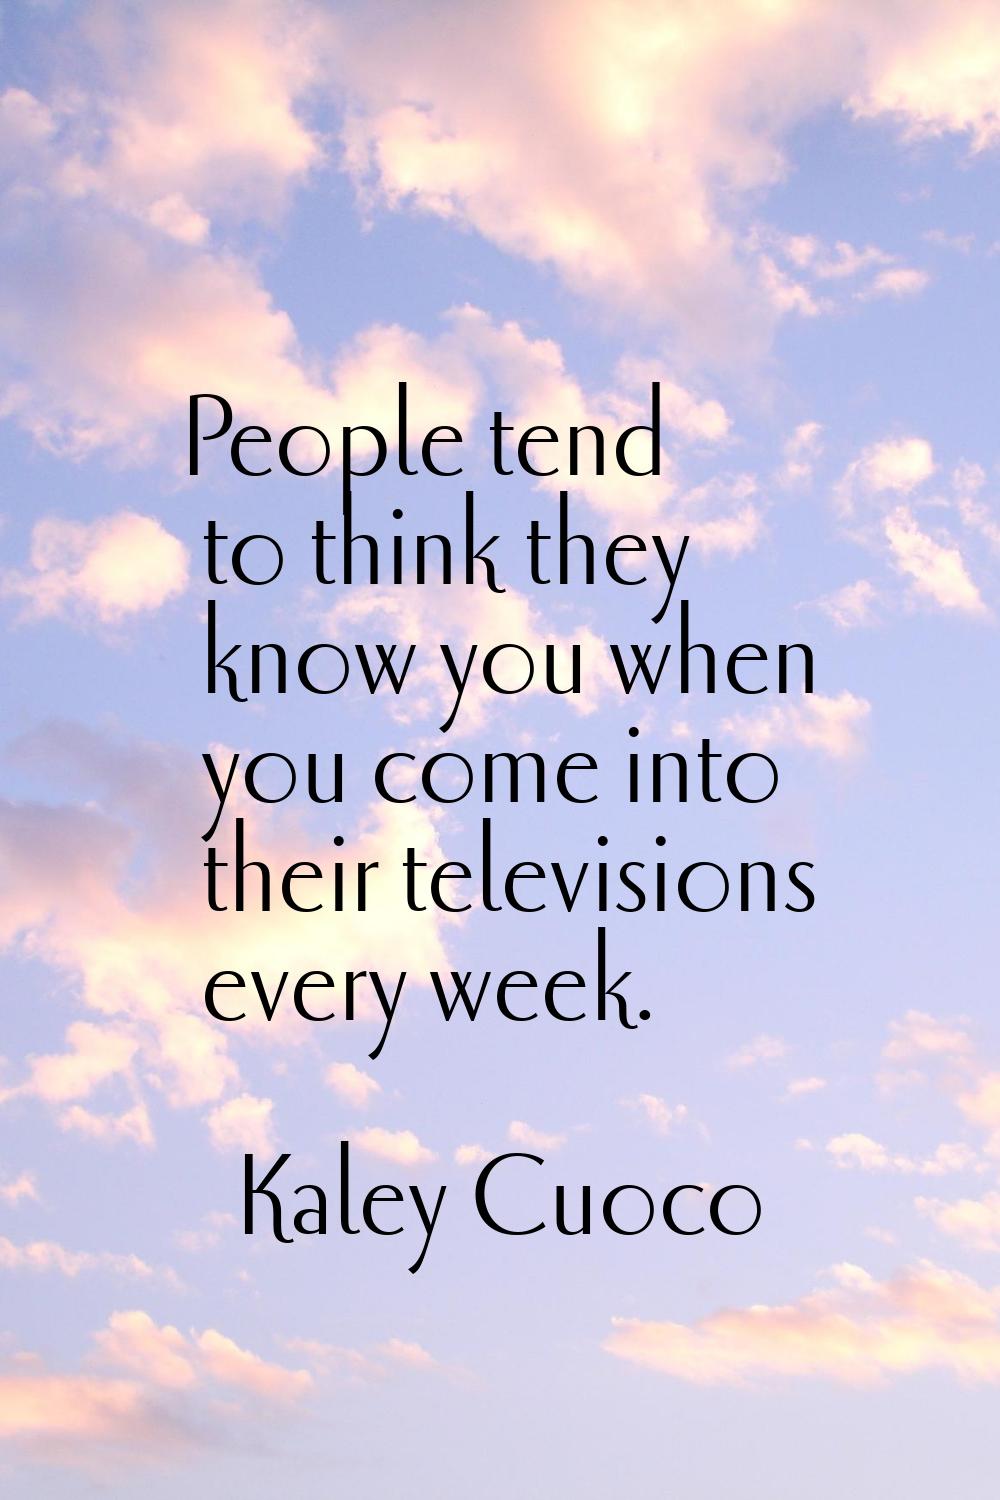 People tend to think they know you when you come into their televisions every week.